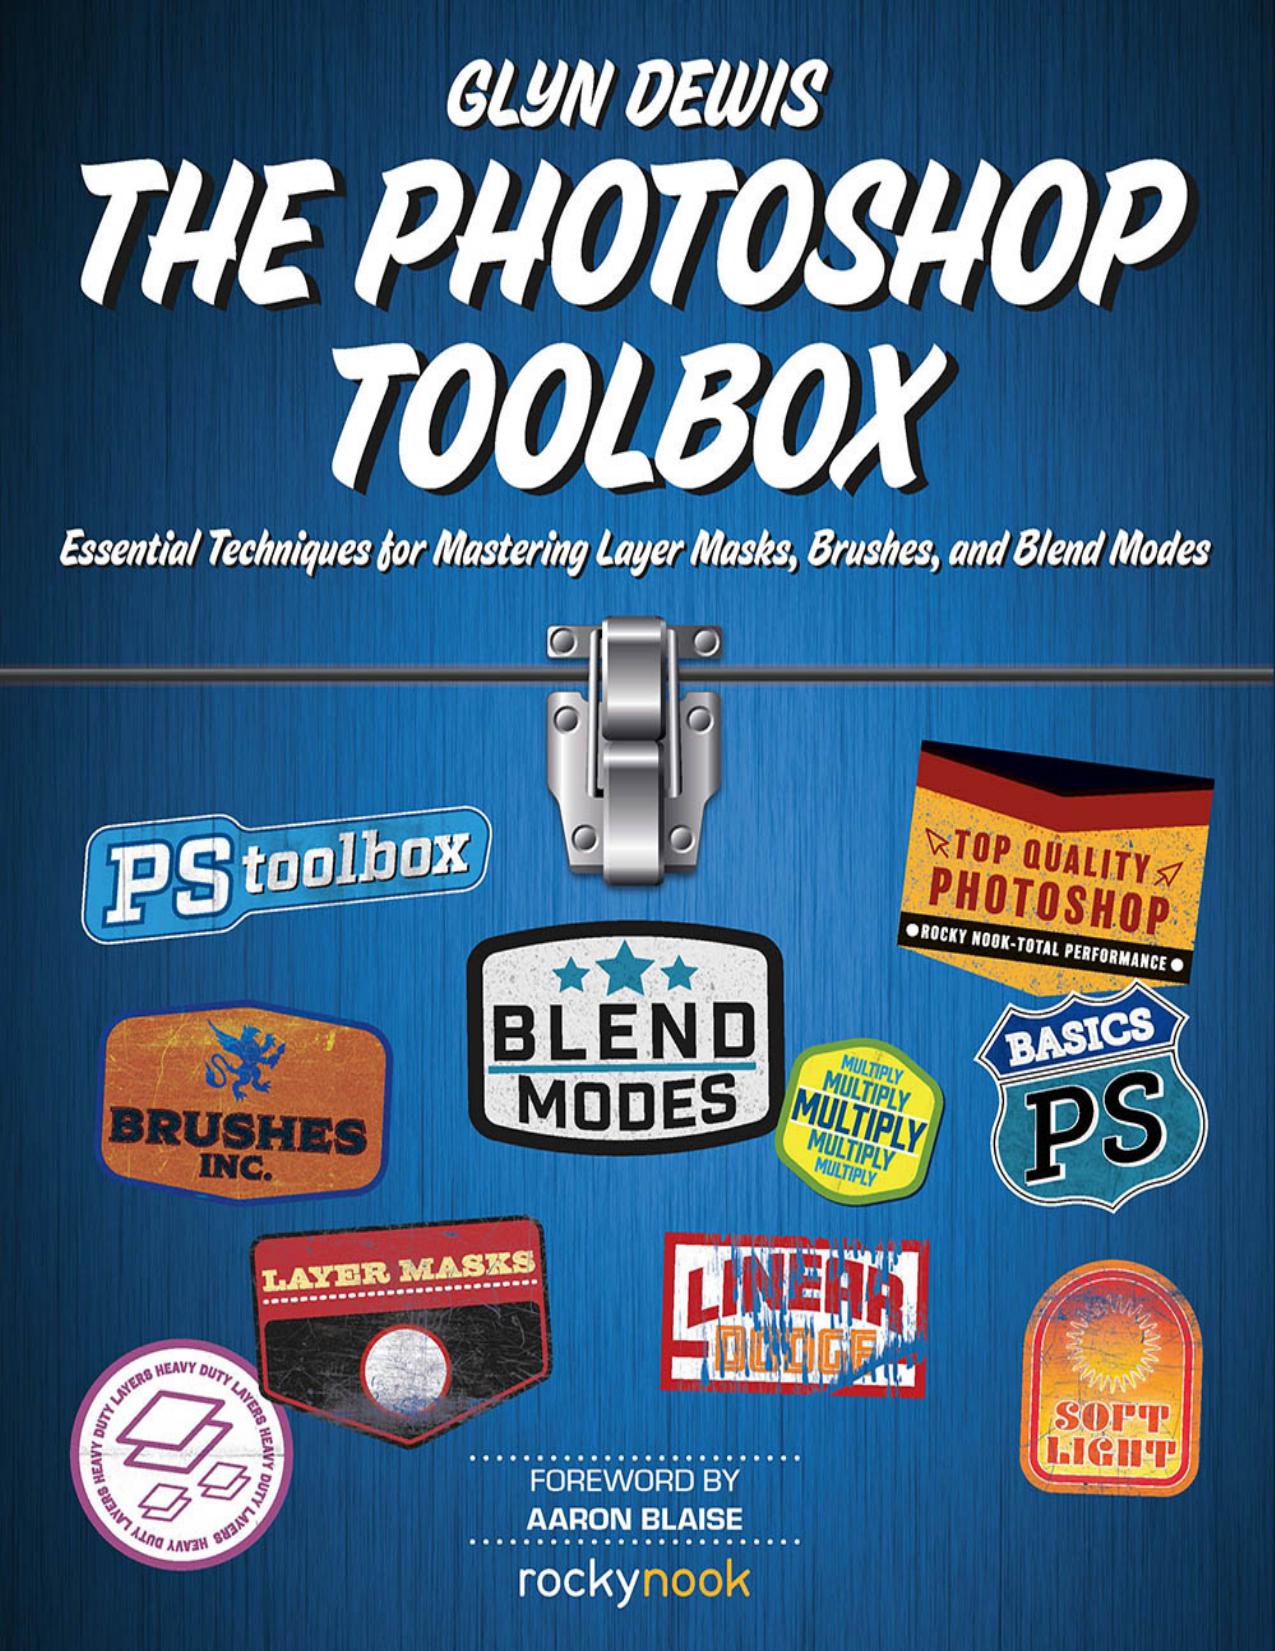 The Photoshop Toolbox by Glyn Dewis